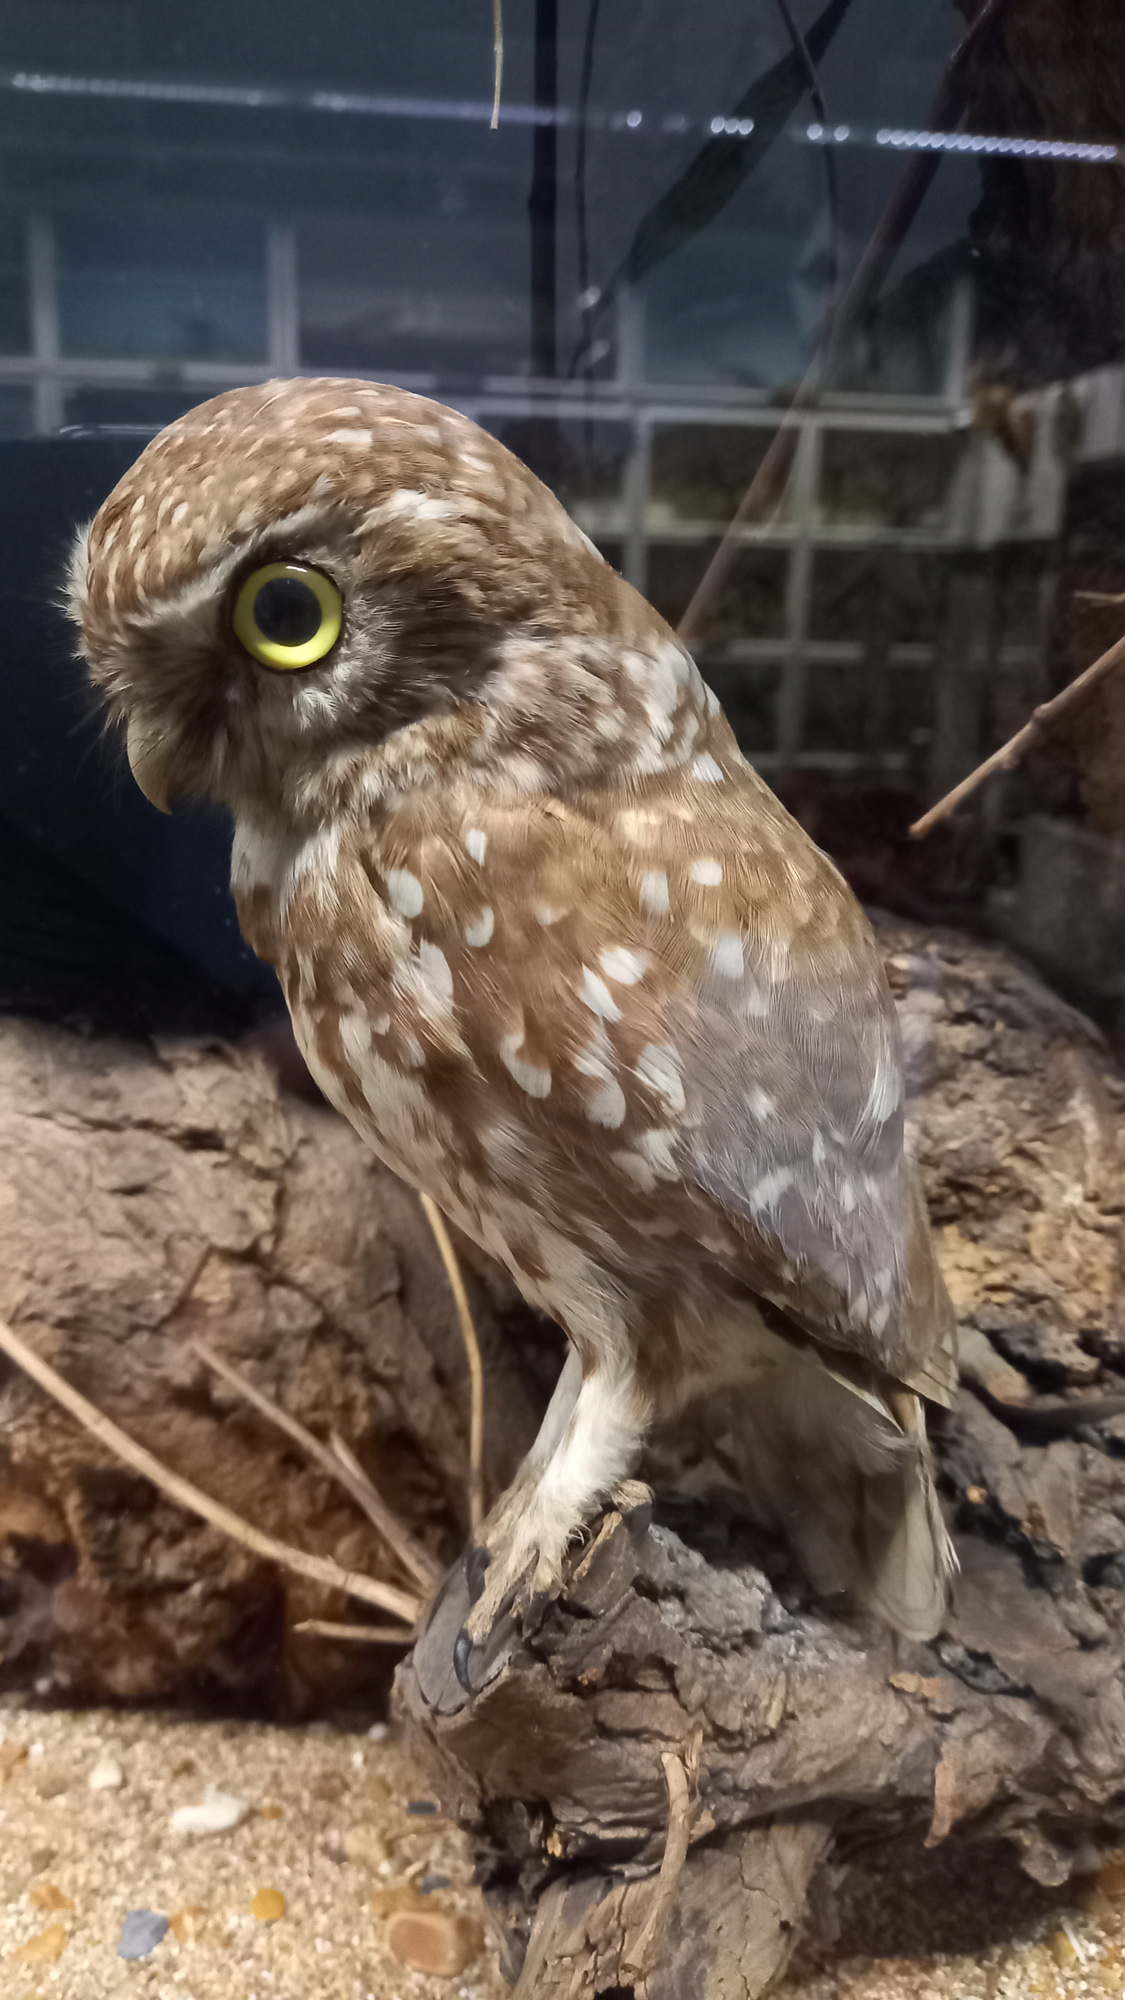 Photograph of a taxidermy owl at the Booth Museum